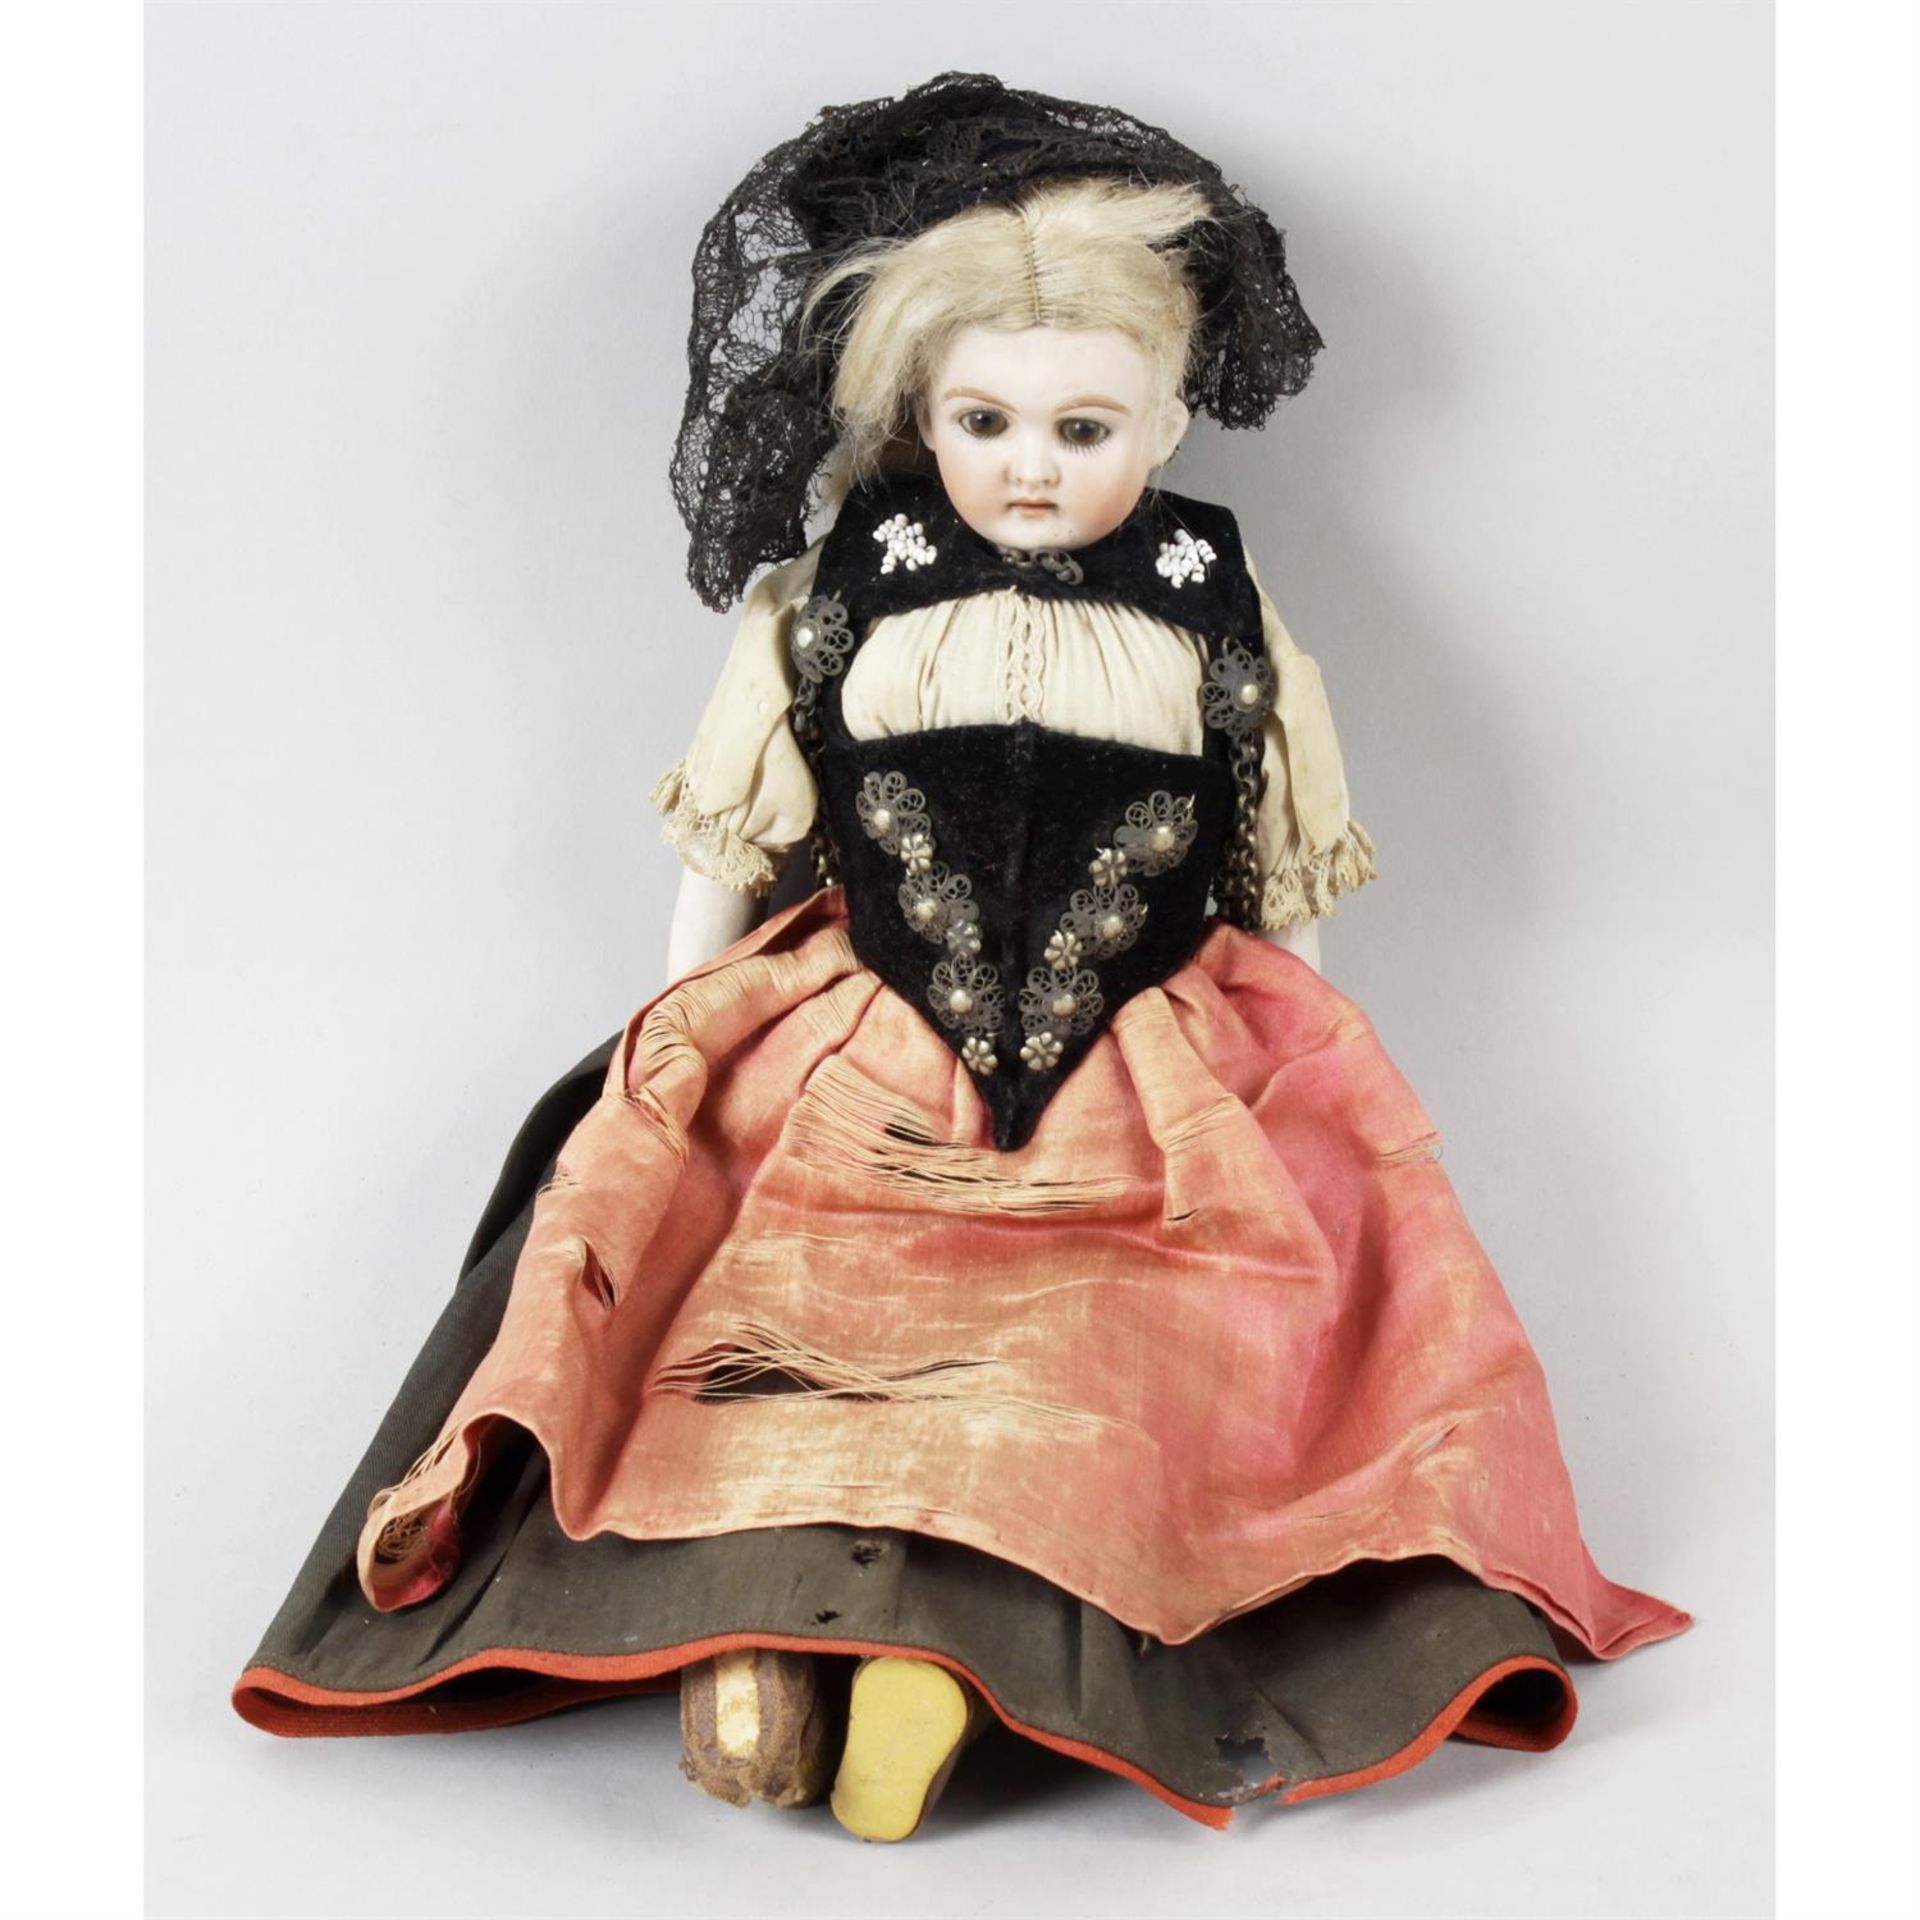 A Kling & Co bisque headed shoulder plate doll.